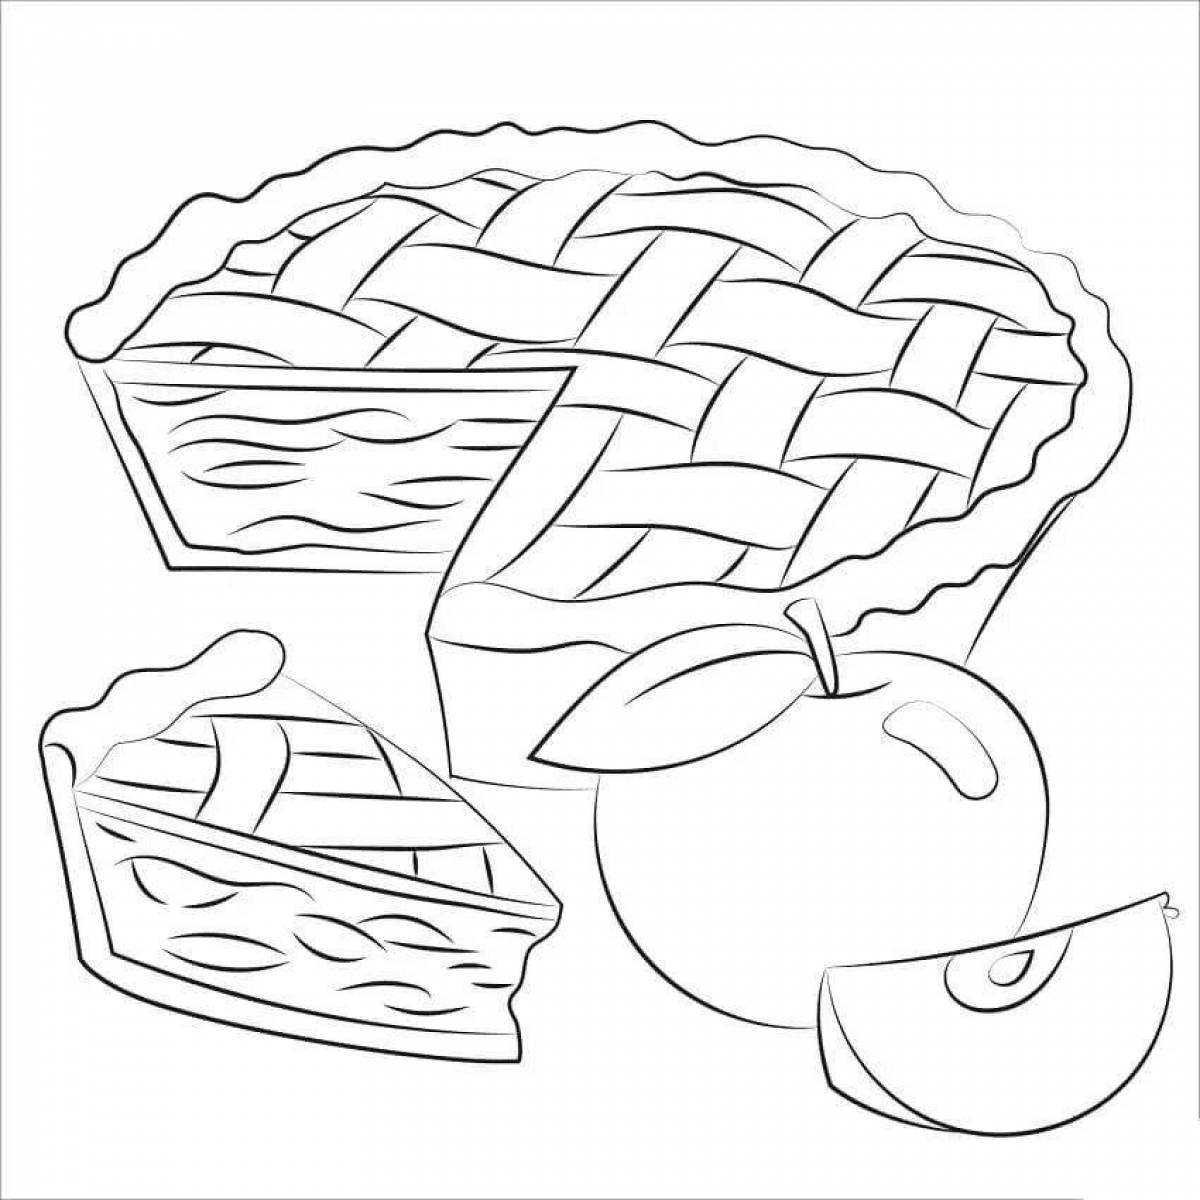 Rich pie coloring page